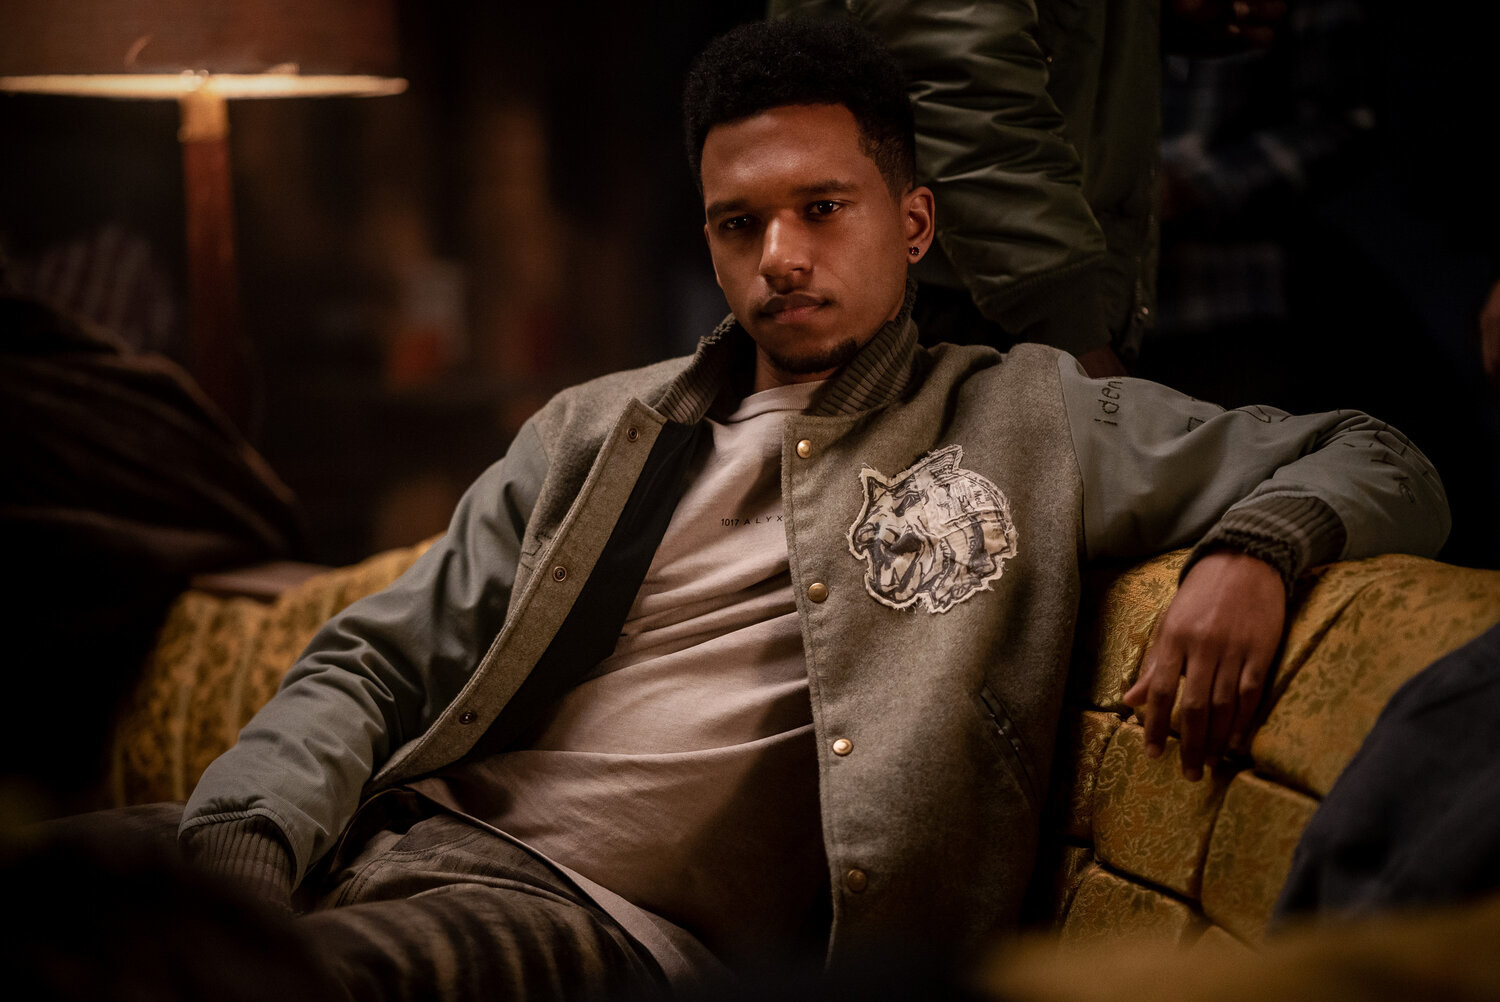 Dru Tejada sitting on a couch wearing a jacket and T-shirt